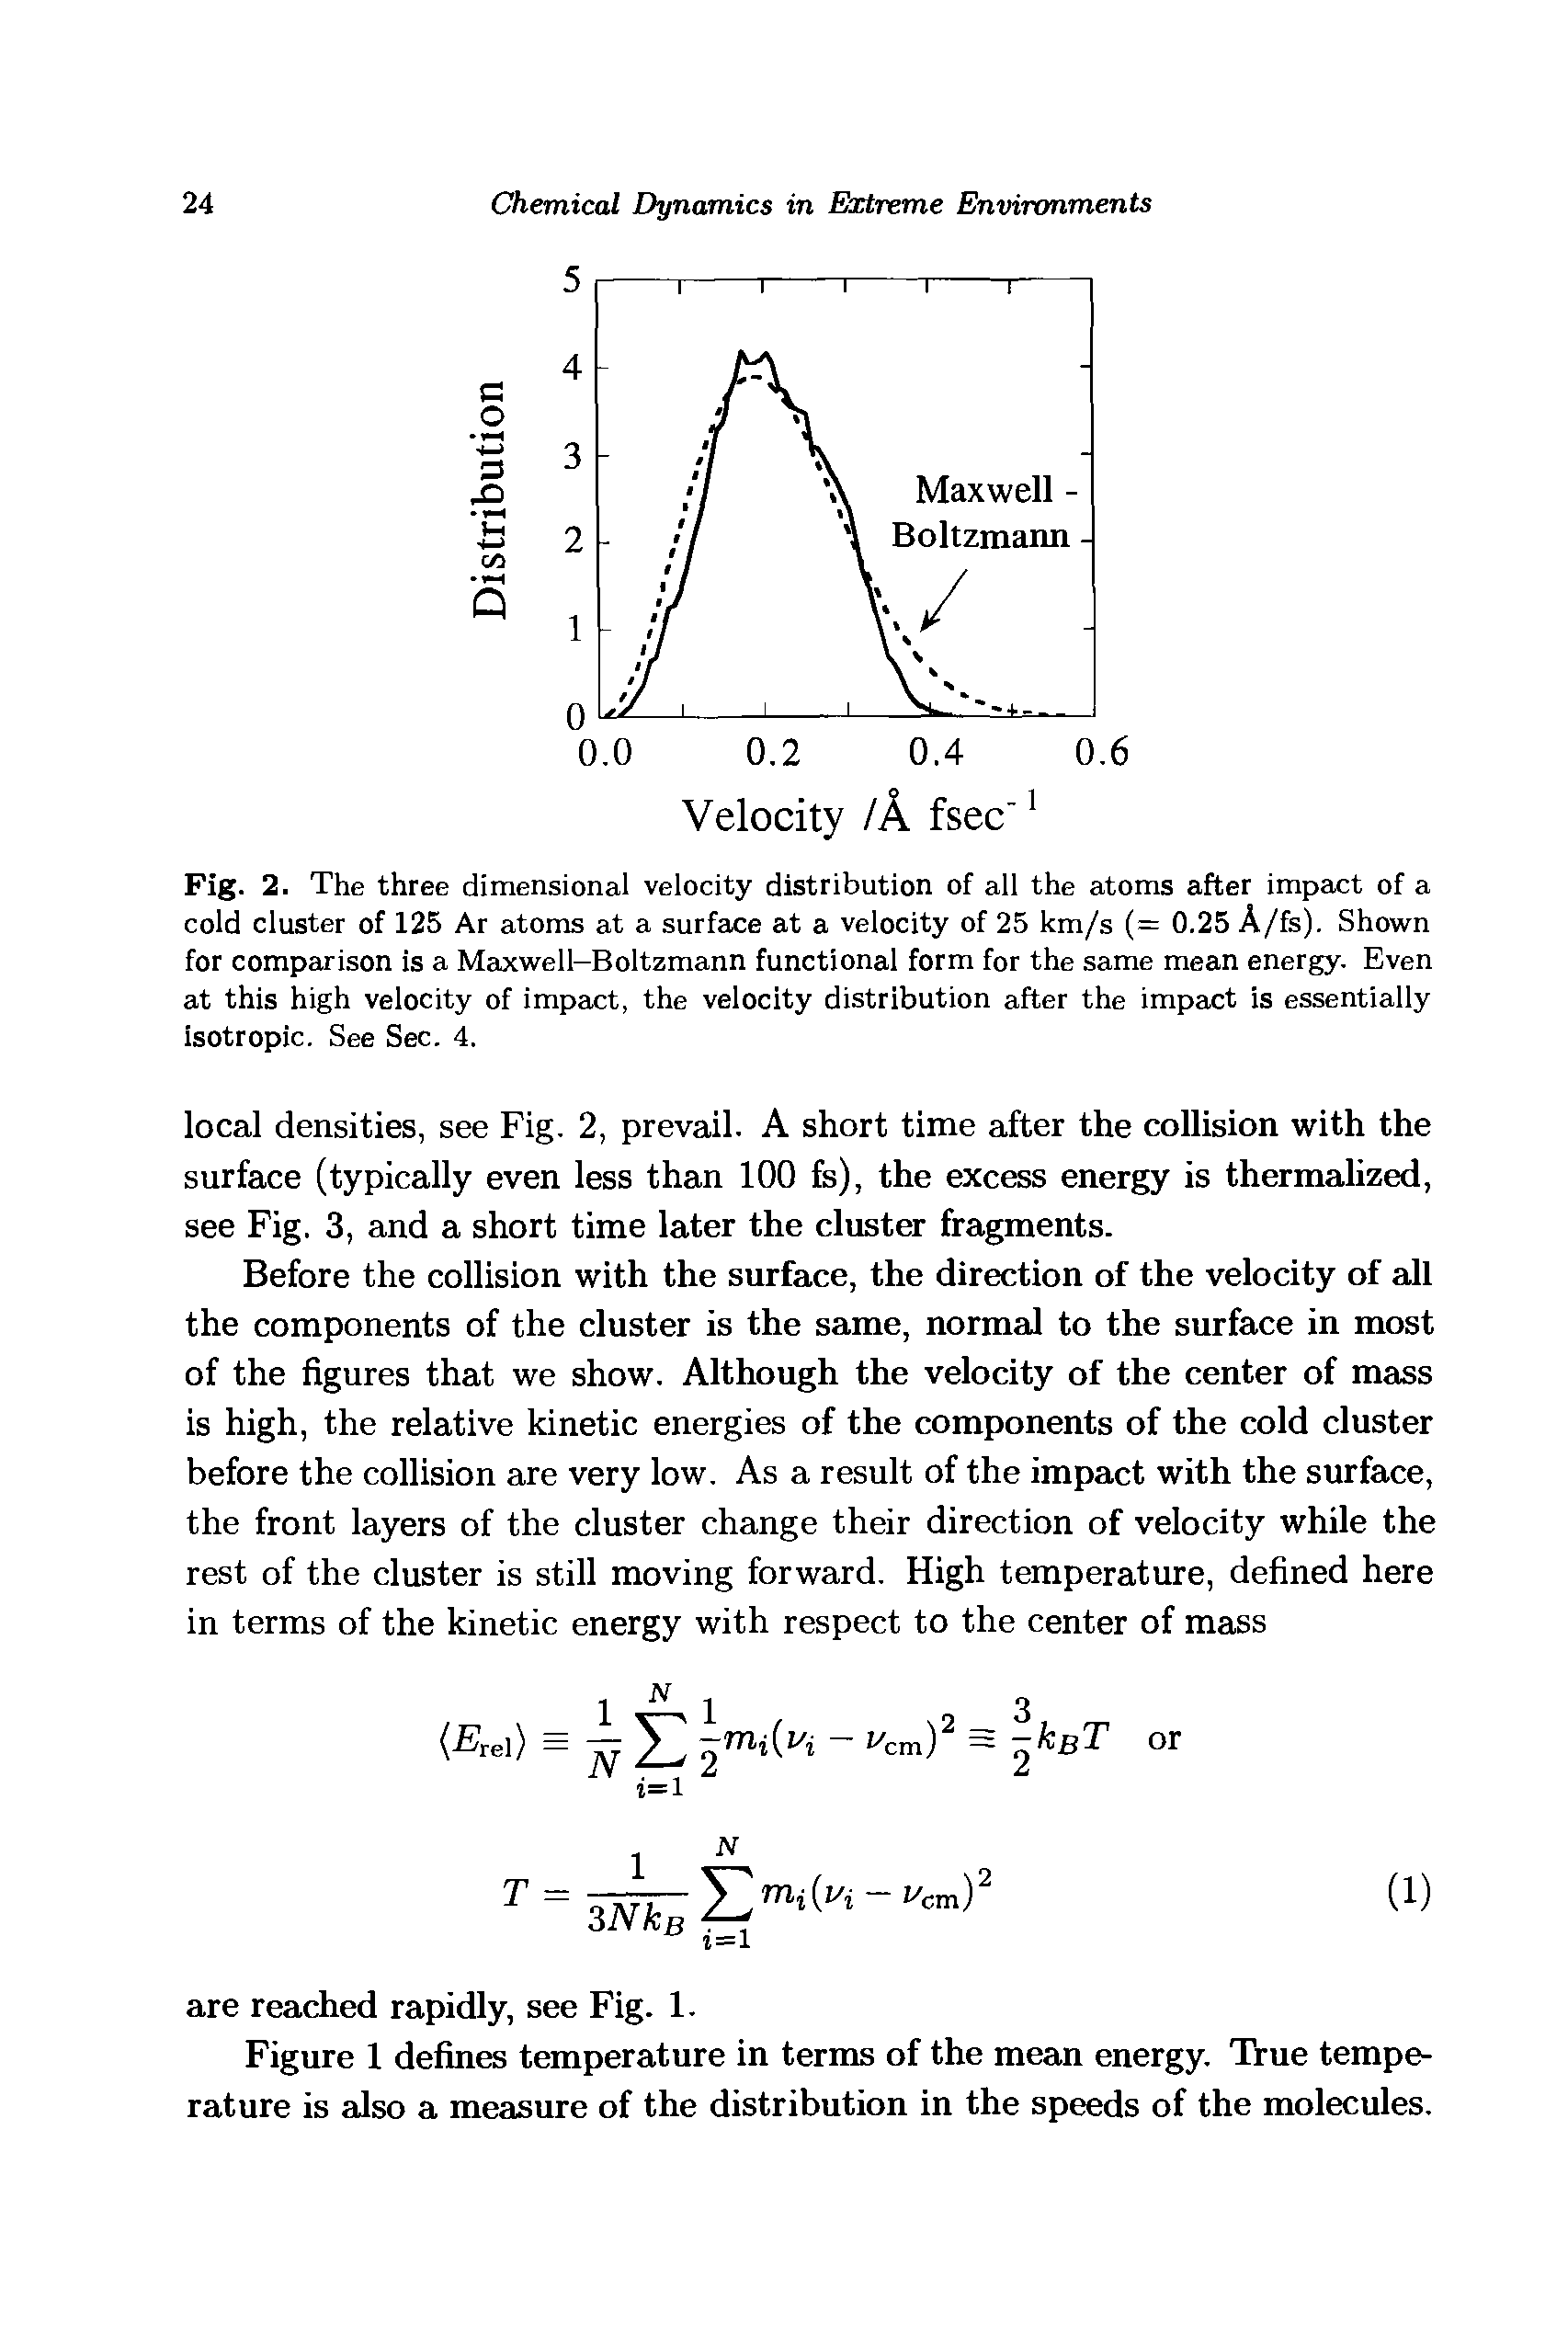 Fig. 2. The three dimensional velocity distribution of all the atoms after impact of a cold cluster of 125 Ar atoms at a surface at a velocity of 25 km/s (= 0.25 A/fs). Shown for comparison is a Meixwell-Boltzmann functional form for the same mean energy. Even at this high velocity of impact, the velocity distribution after the impact is essentially isotropic. See Sec. 4.